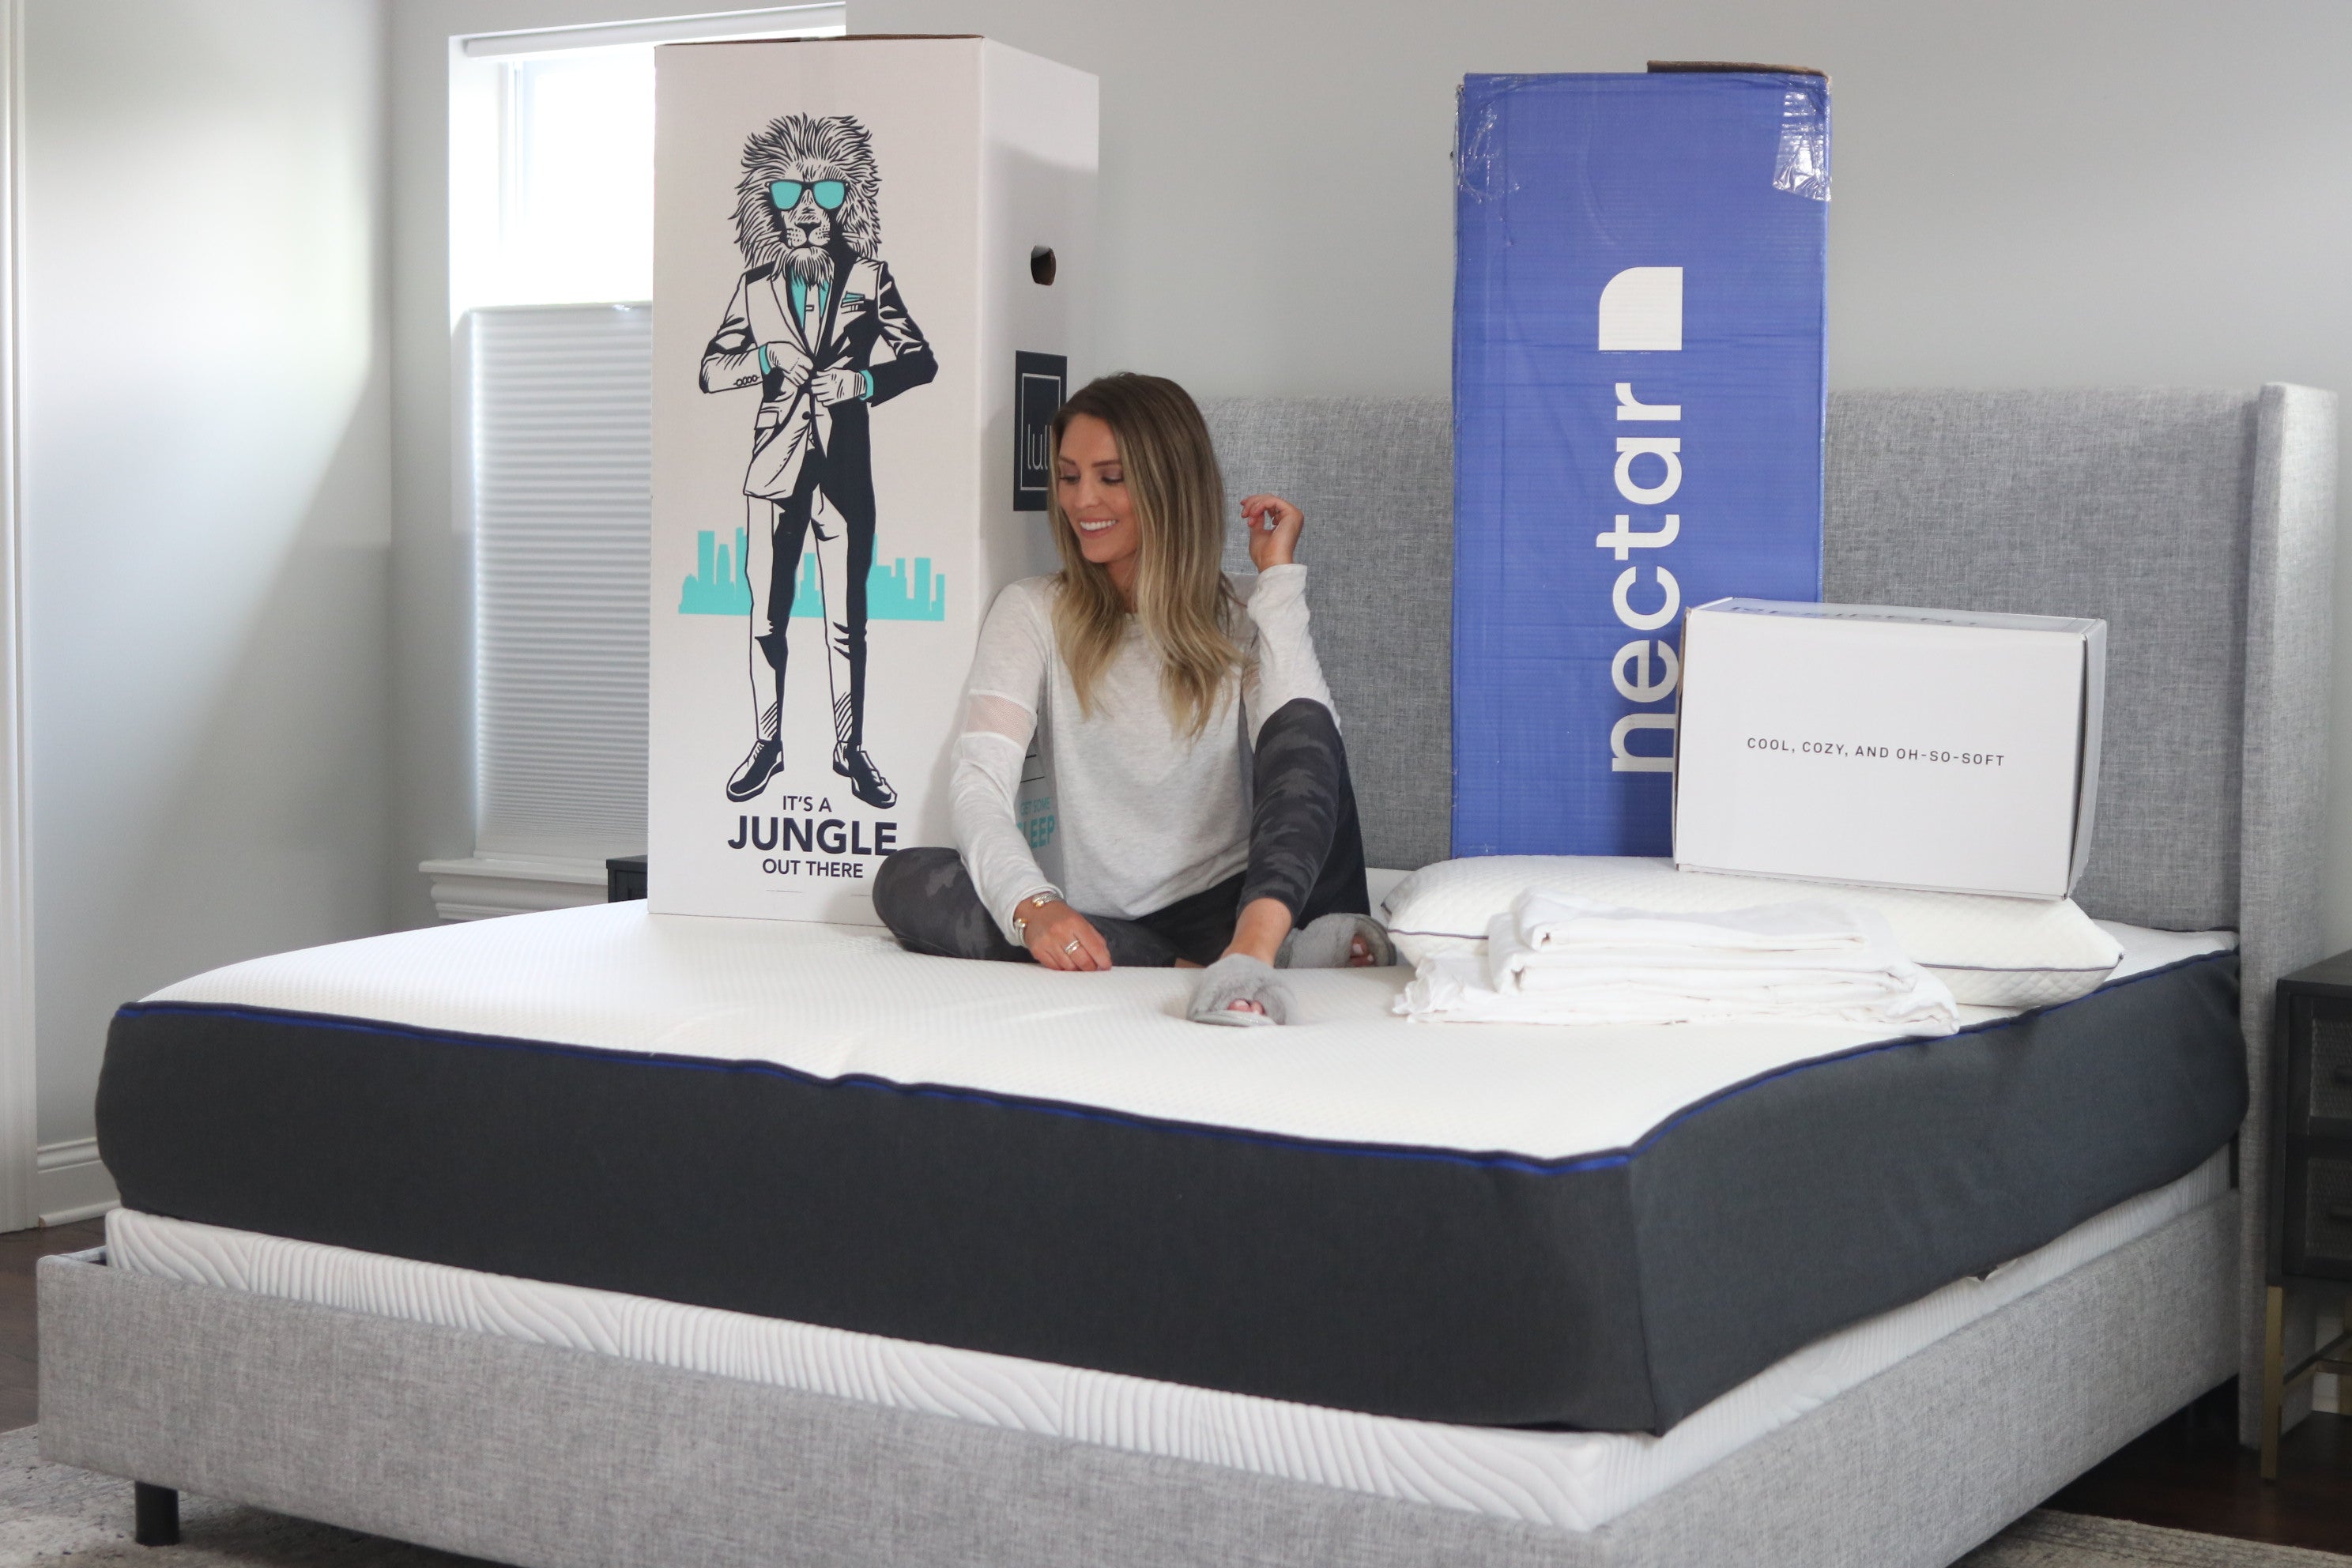 Load video: A woman sitting on a mattress smiling with a lull box and nectar box behind her.